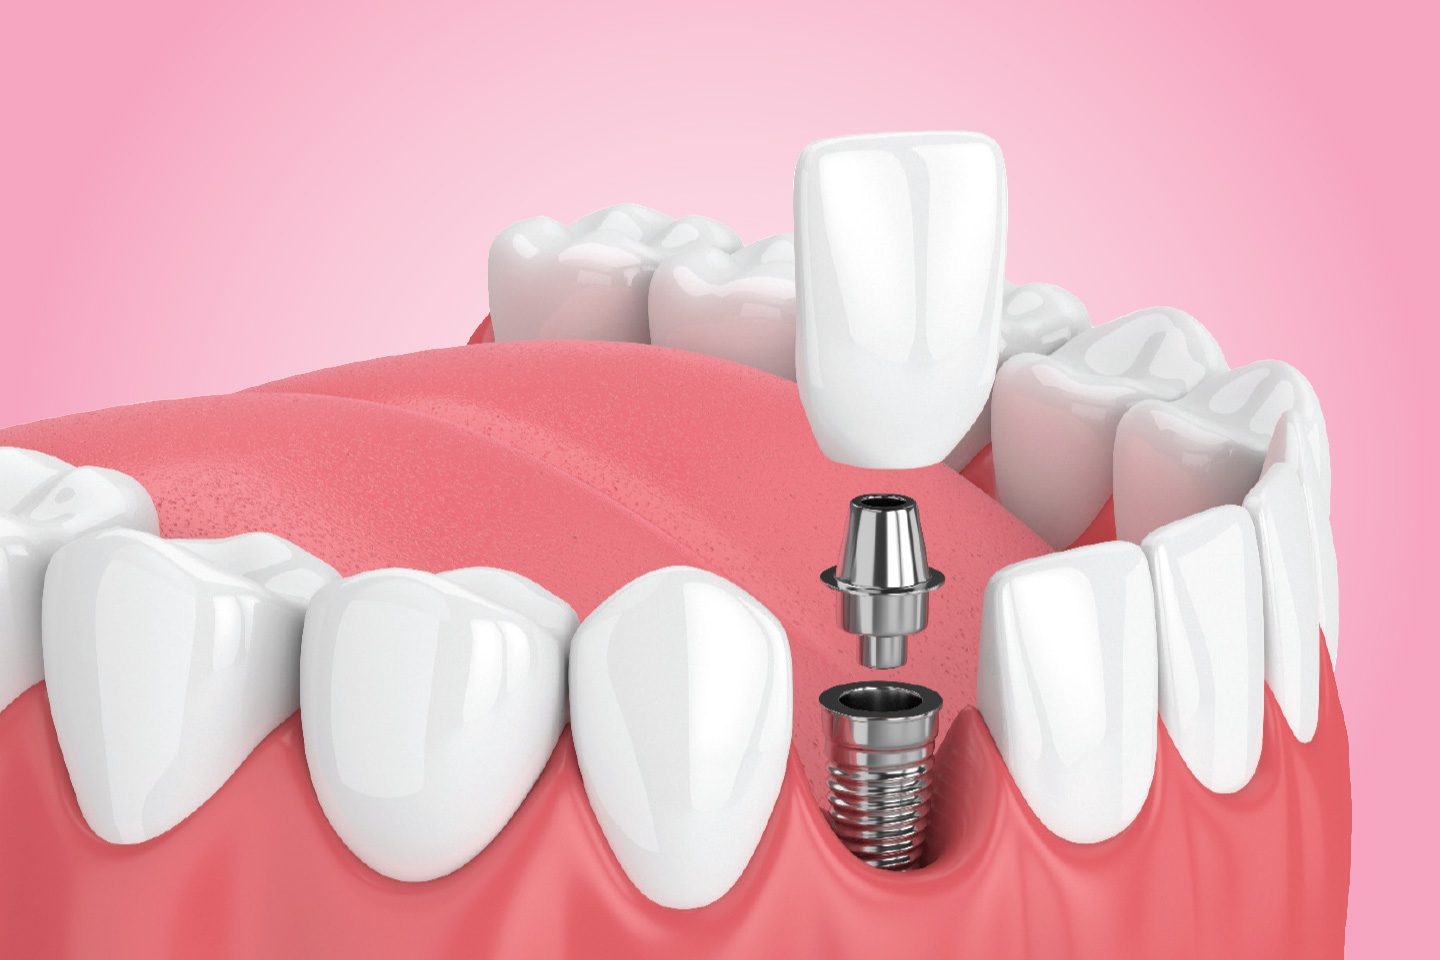 rendering of a dental implant in a mouth